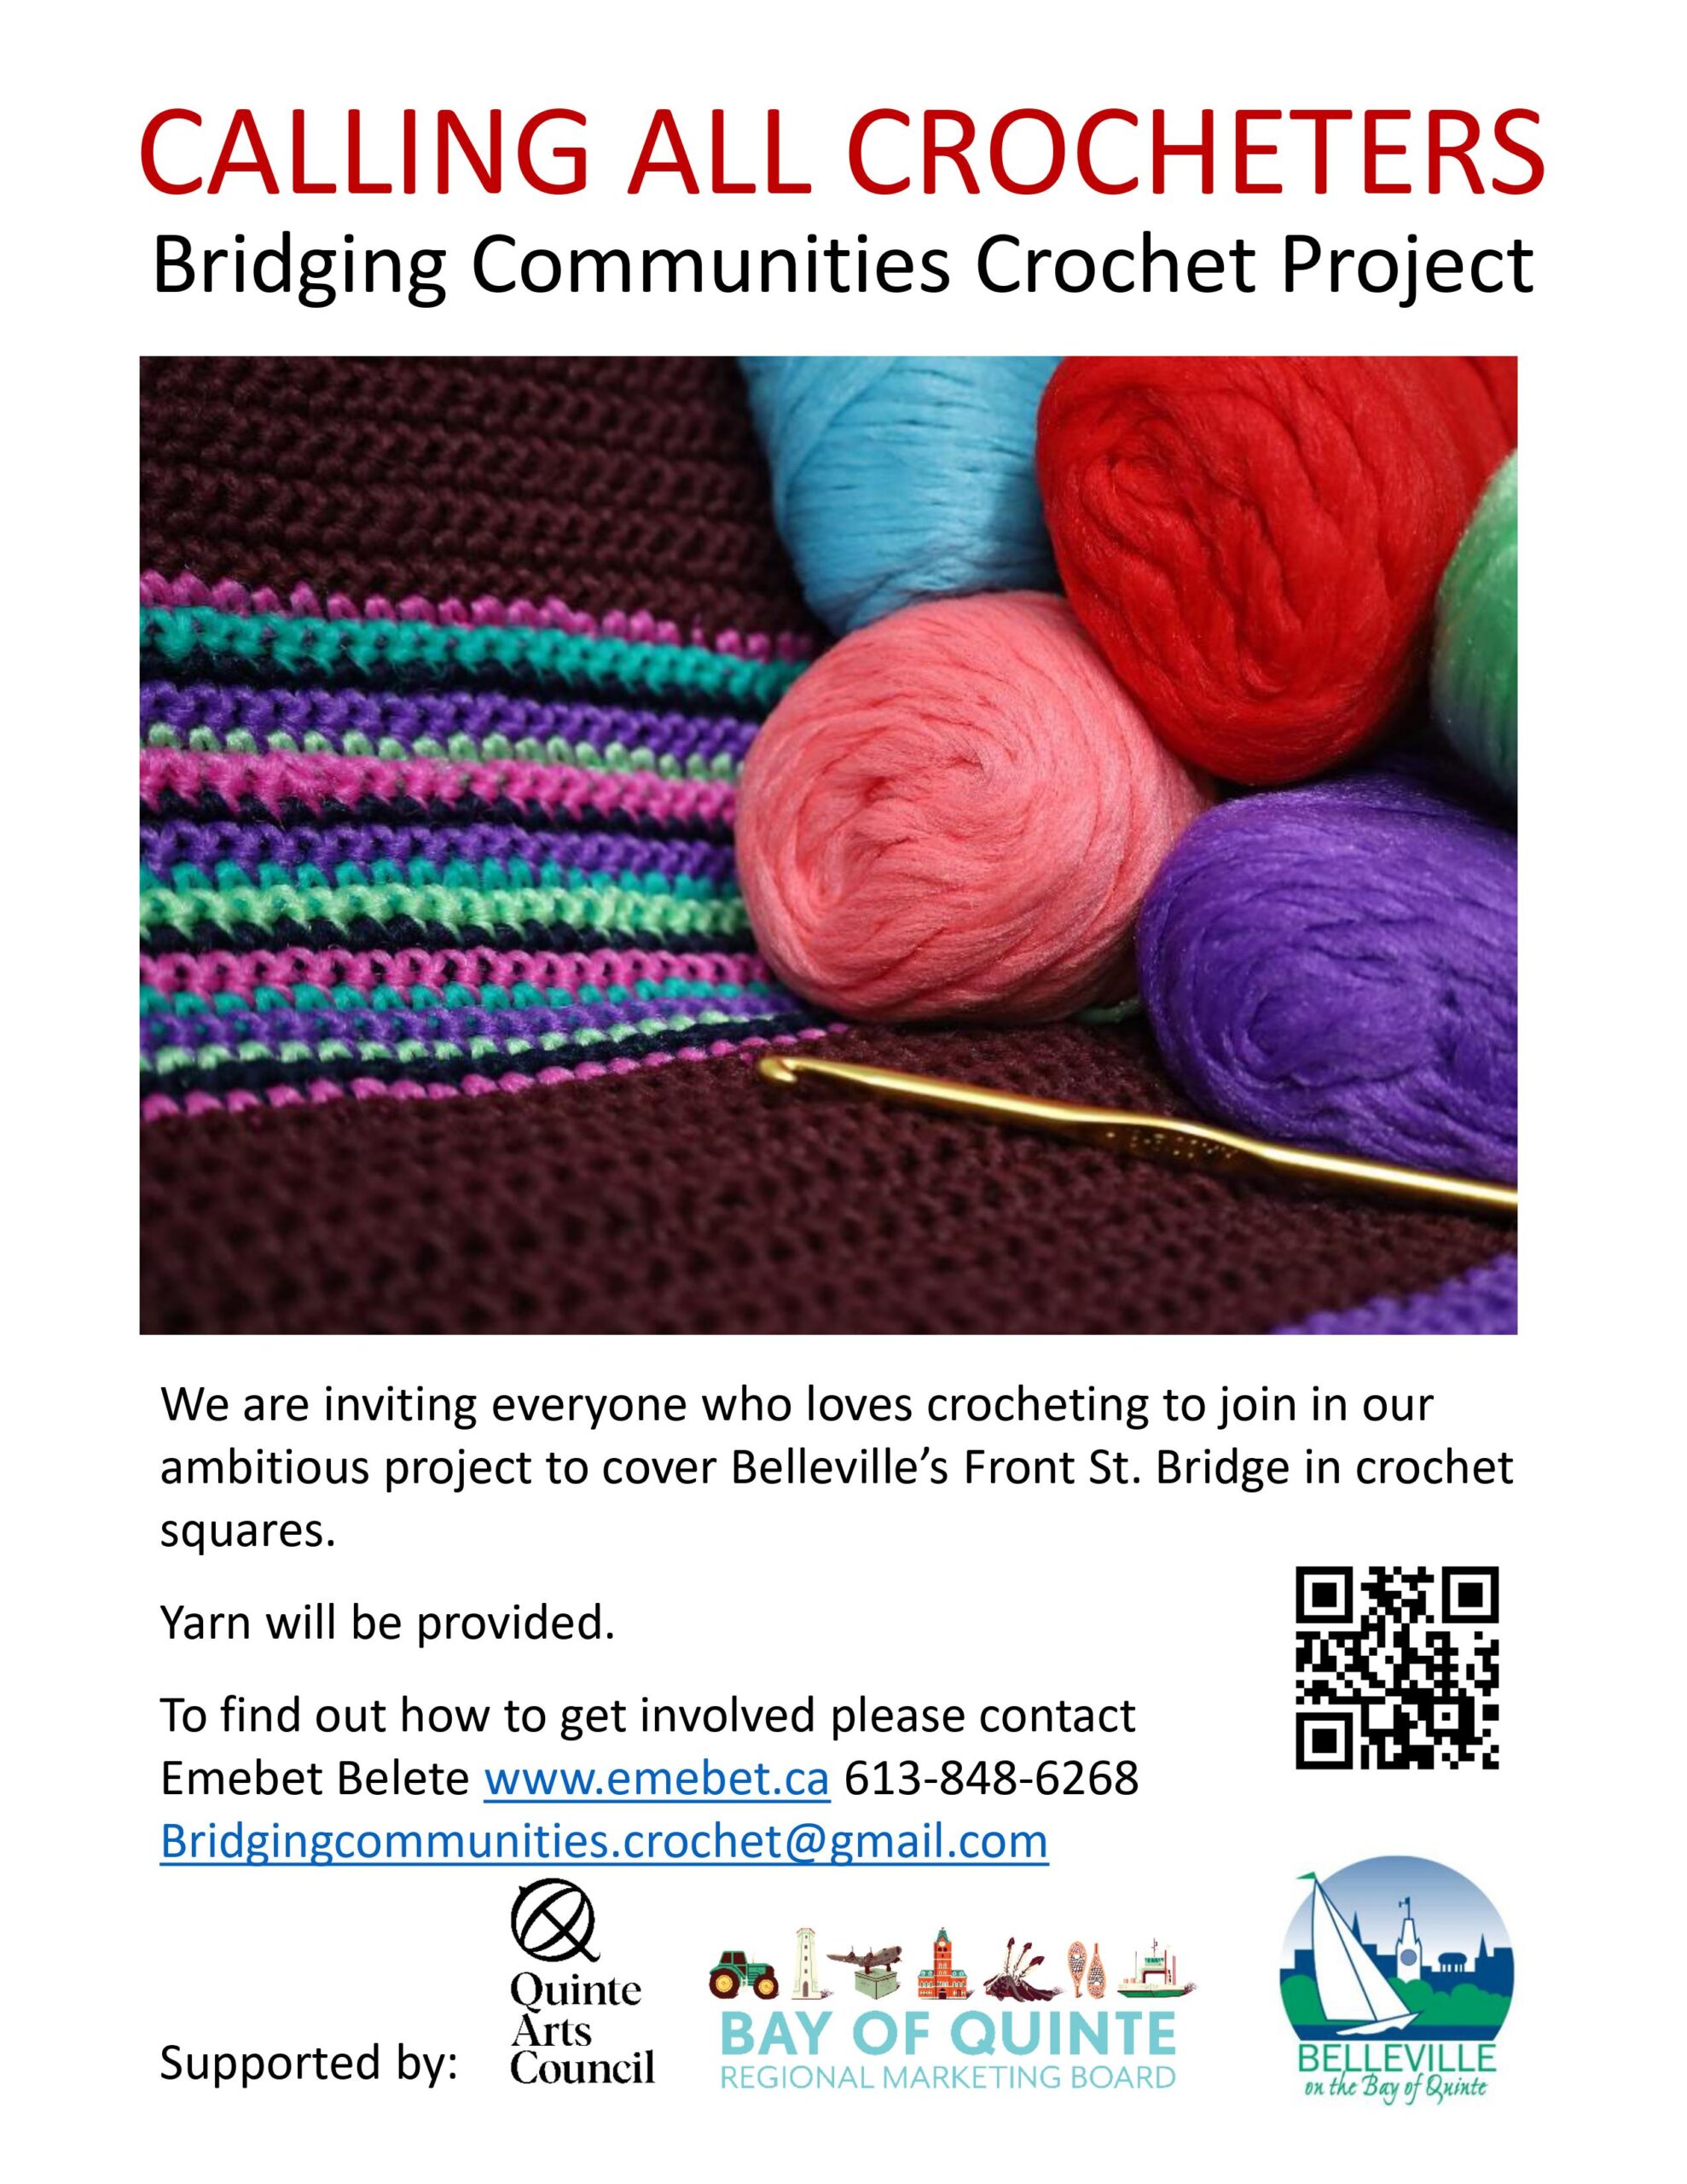 event poster with title reading "calling all crocheters" and has a photo of yarn/fabric balls.